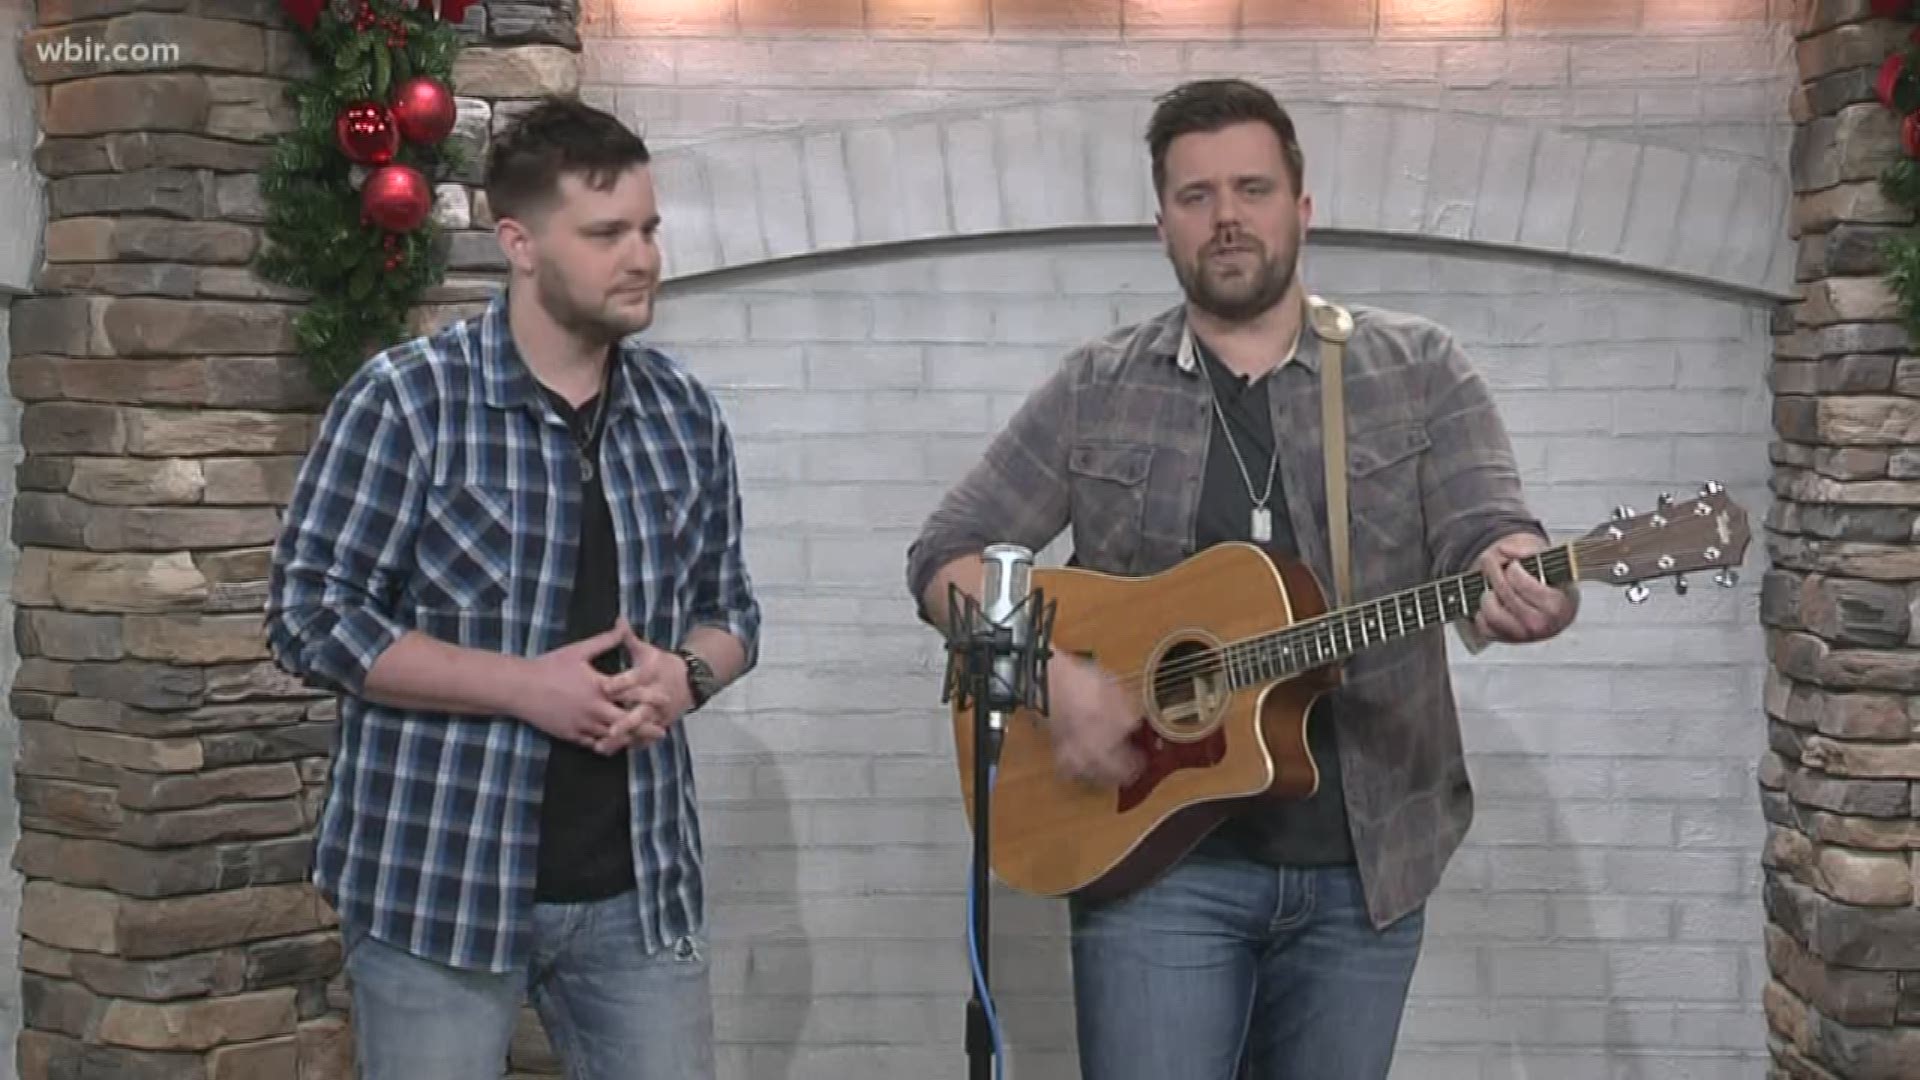 The Duggers are from Greeneville but live now in Nashville. They'll perform at the Niswonger Performing Arts Center on Jan. 3, duggerband.com. Dec. 6, 2019-4pm.